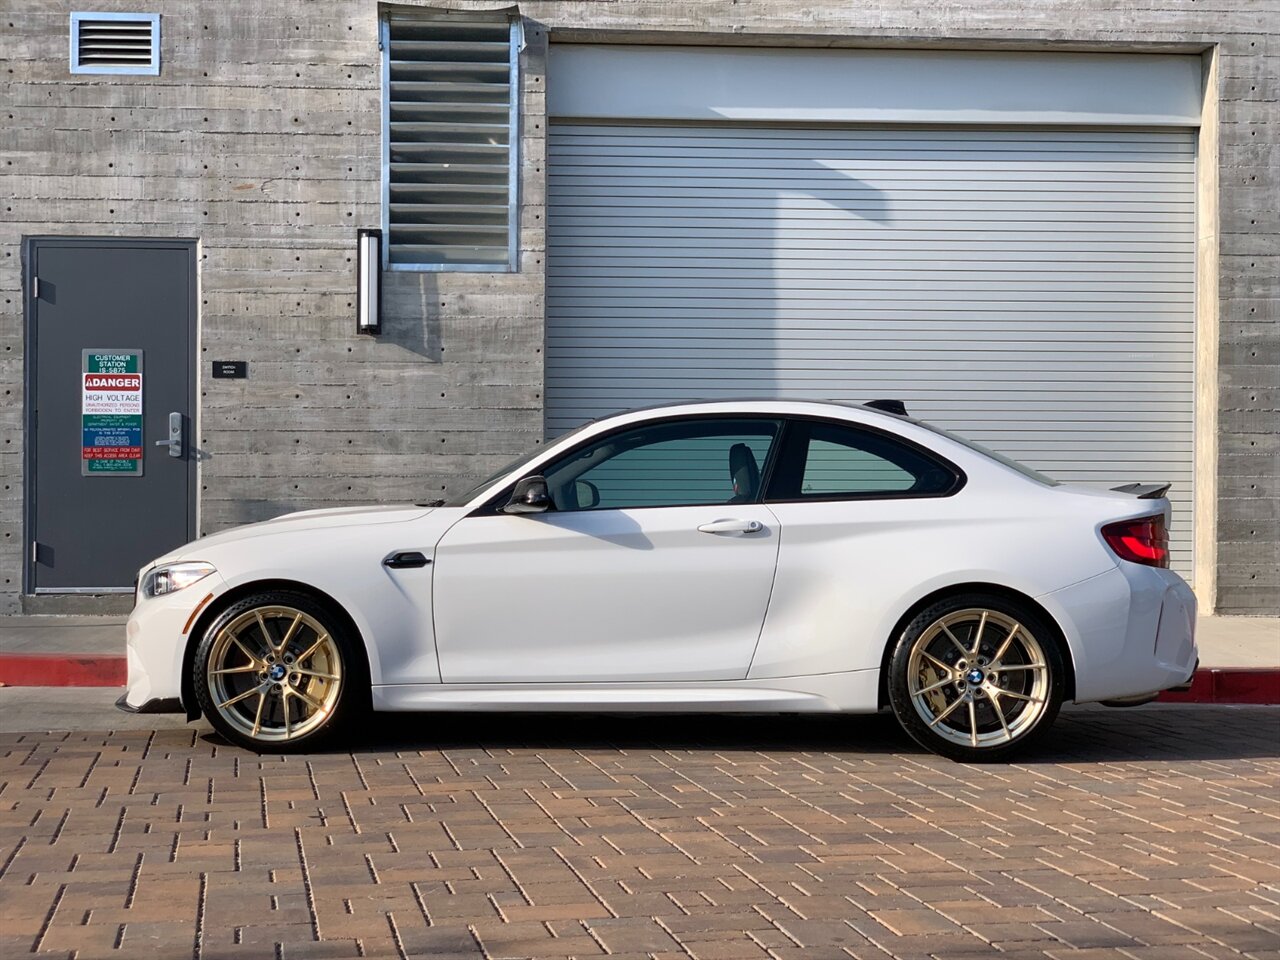 2020 Bmw M2 Cs Alpine White Gold Wheels For Sale In Los Angeles, Ca Dct  Carbon Ceramic Brakes Cup 2